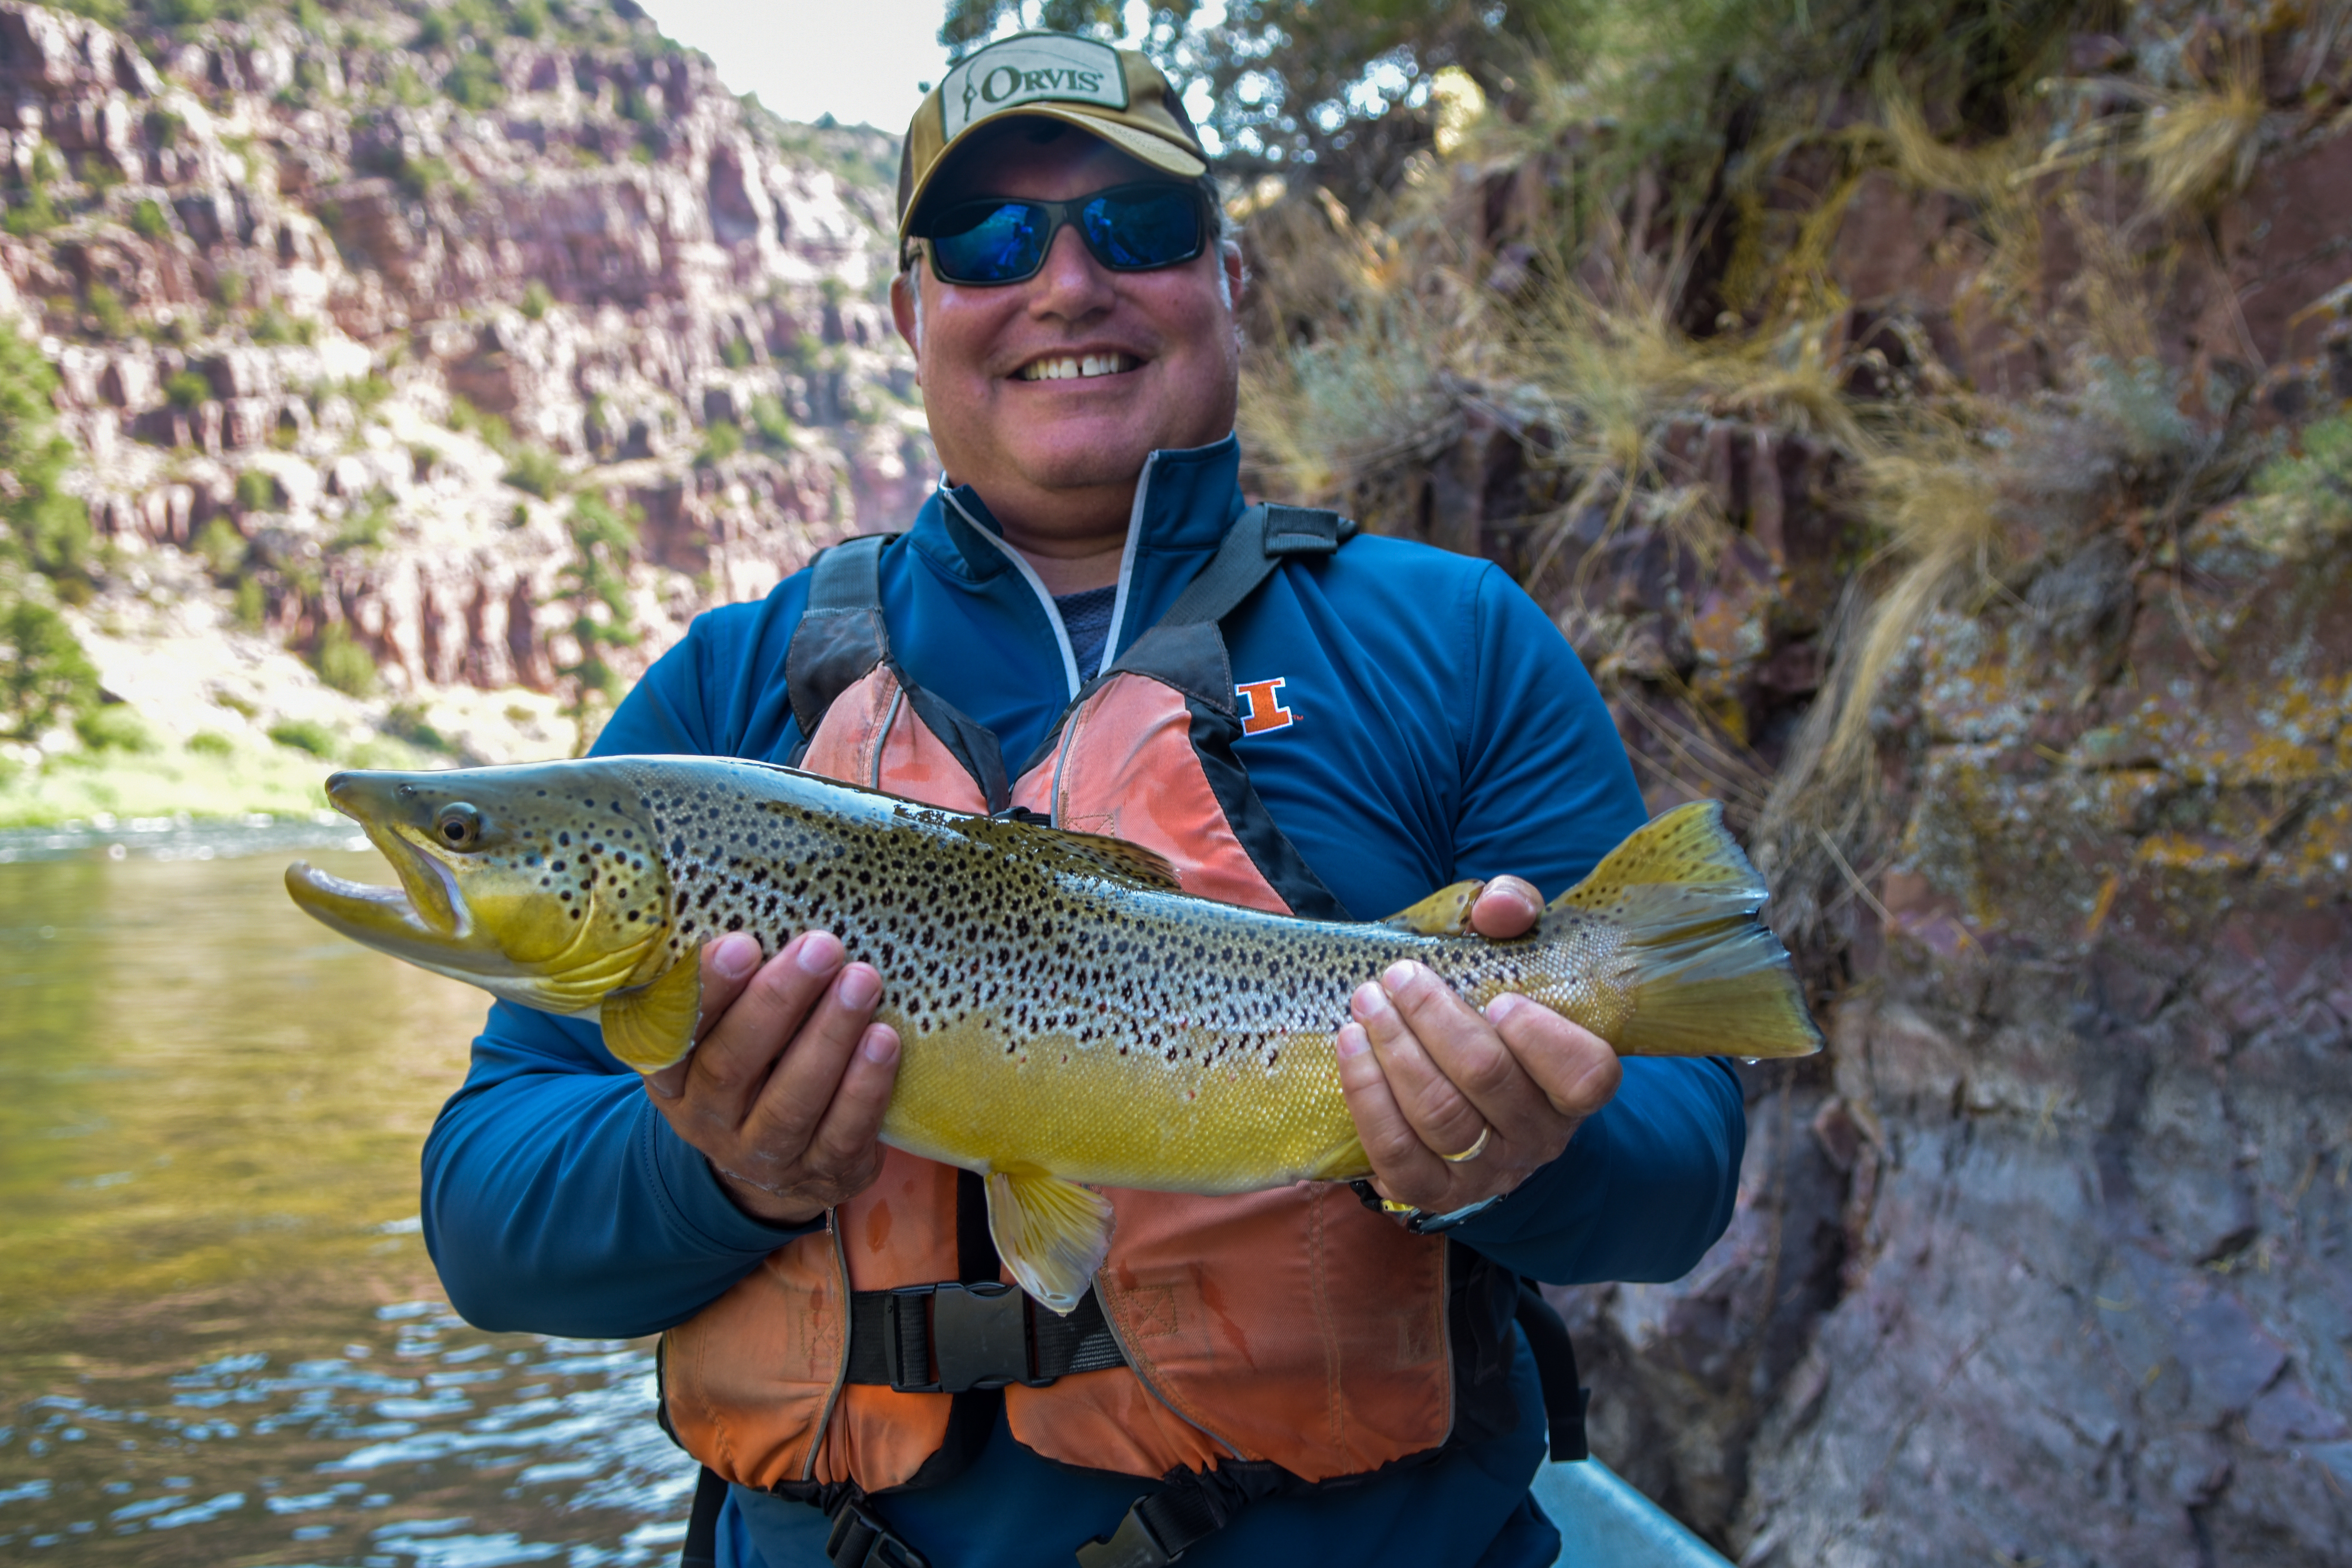 Strawberry Reservoir Fishing Report 2020 - All About Fishing